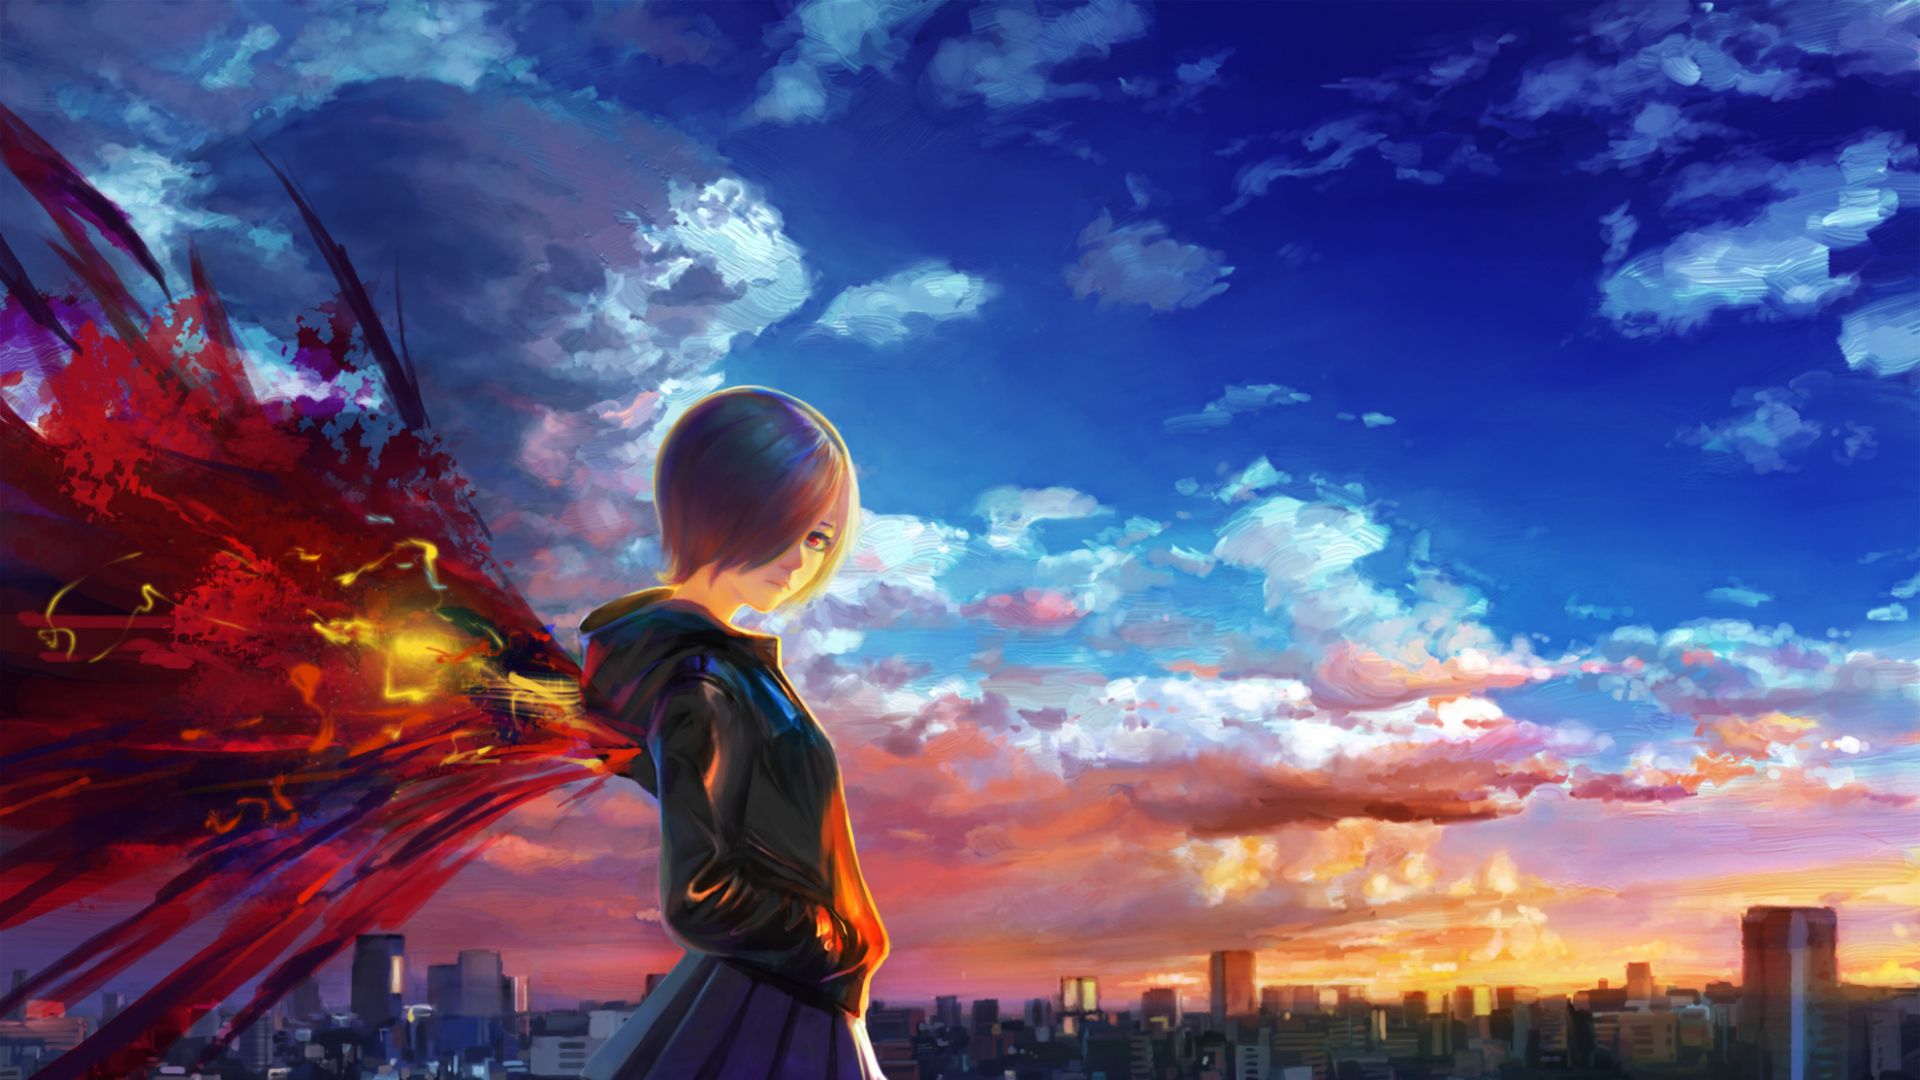 HD Anime Wallpapers 1920x1080 Full HD Free Download